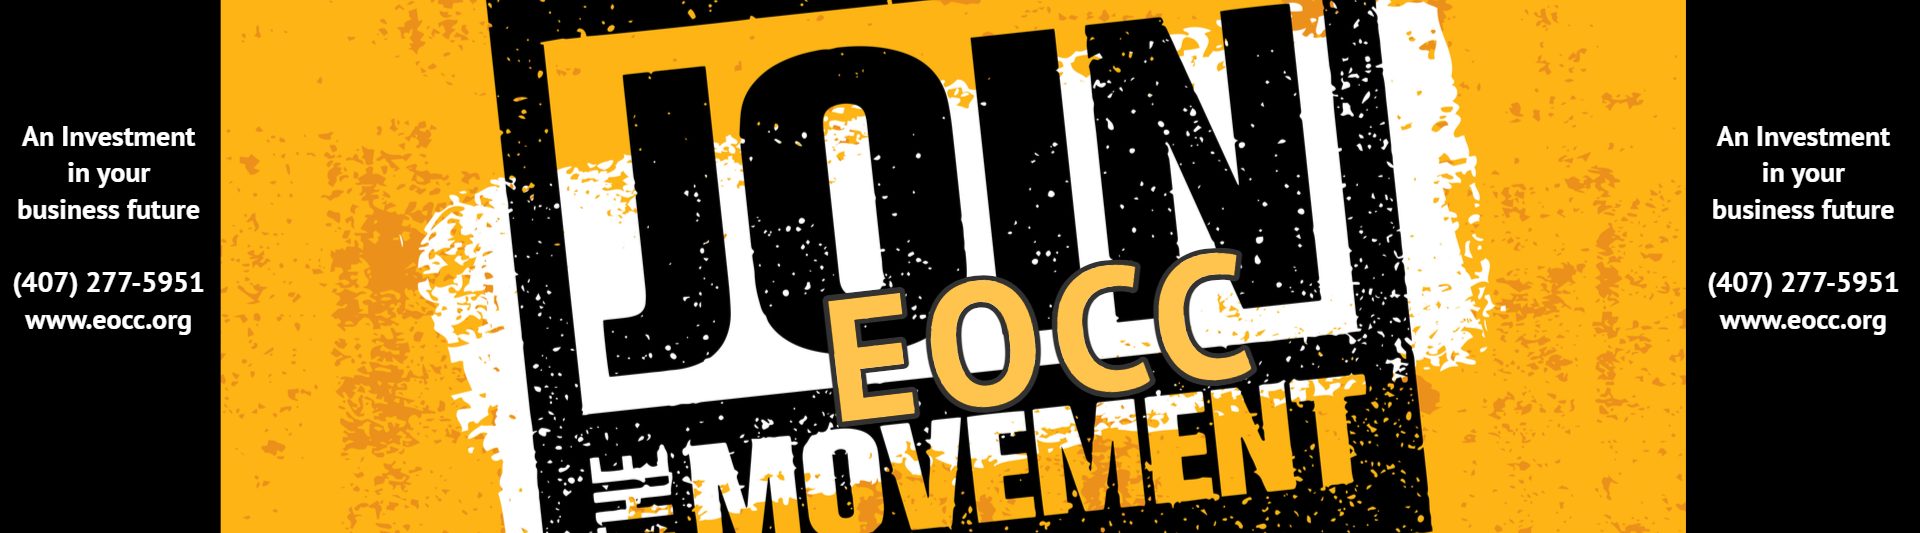 Join the EOCC Movement